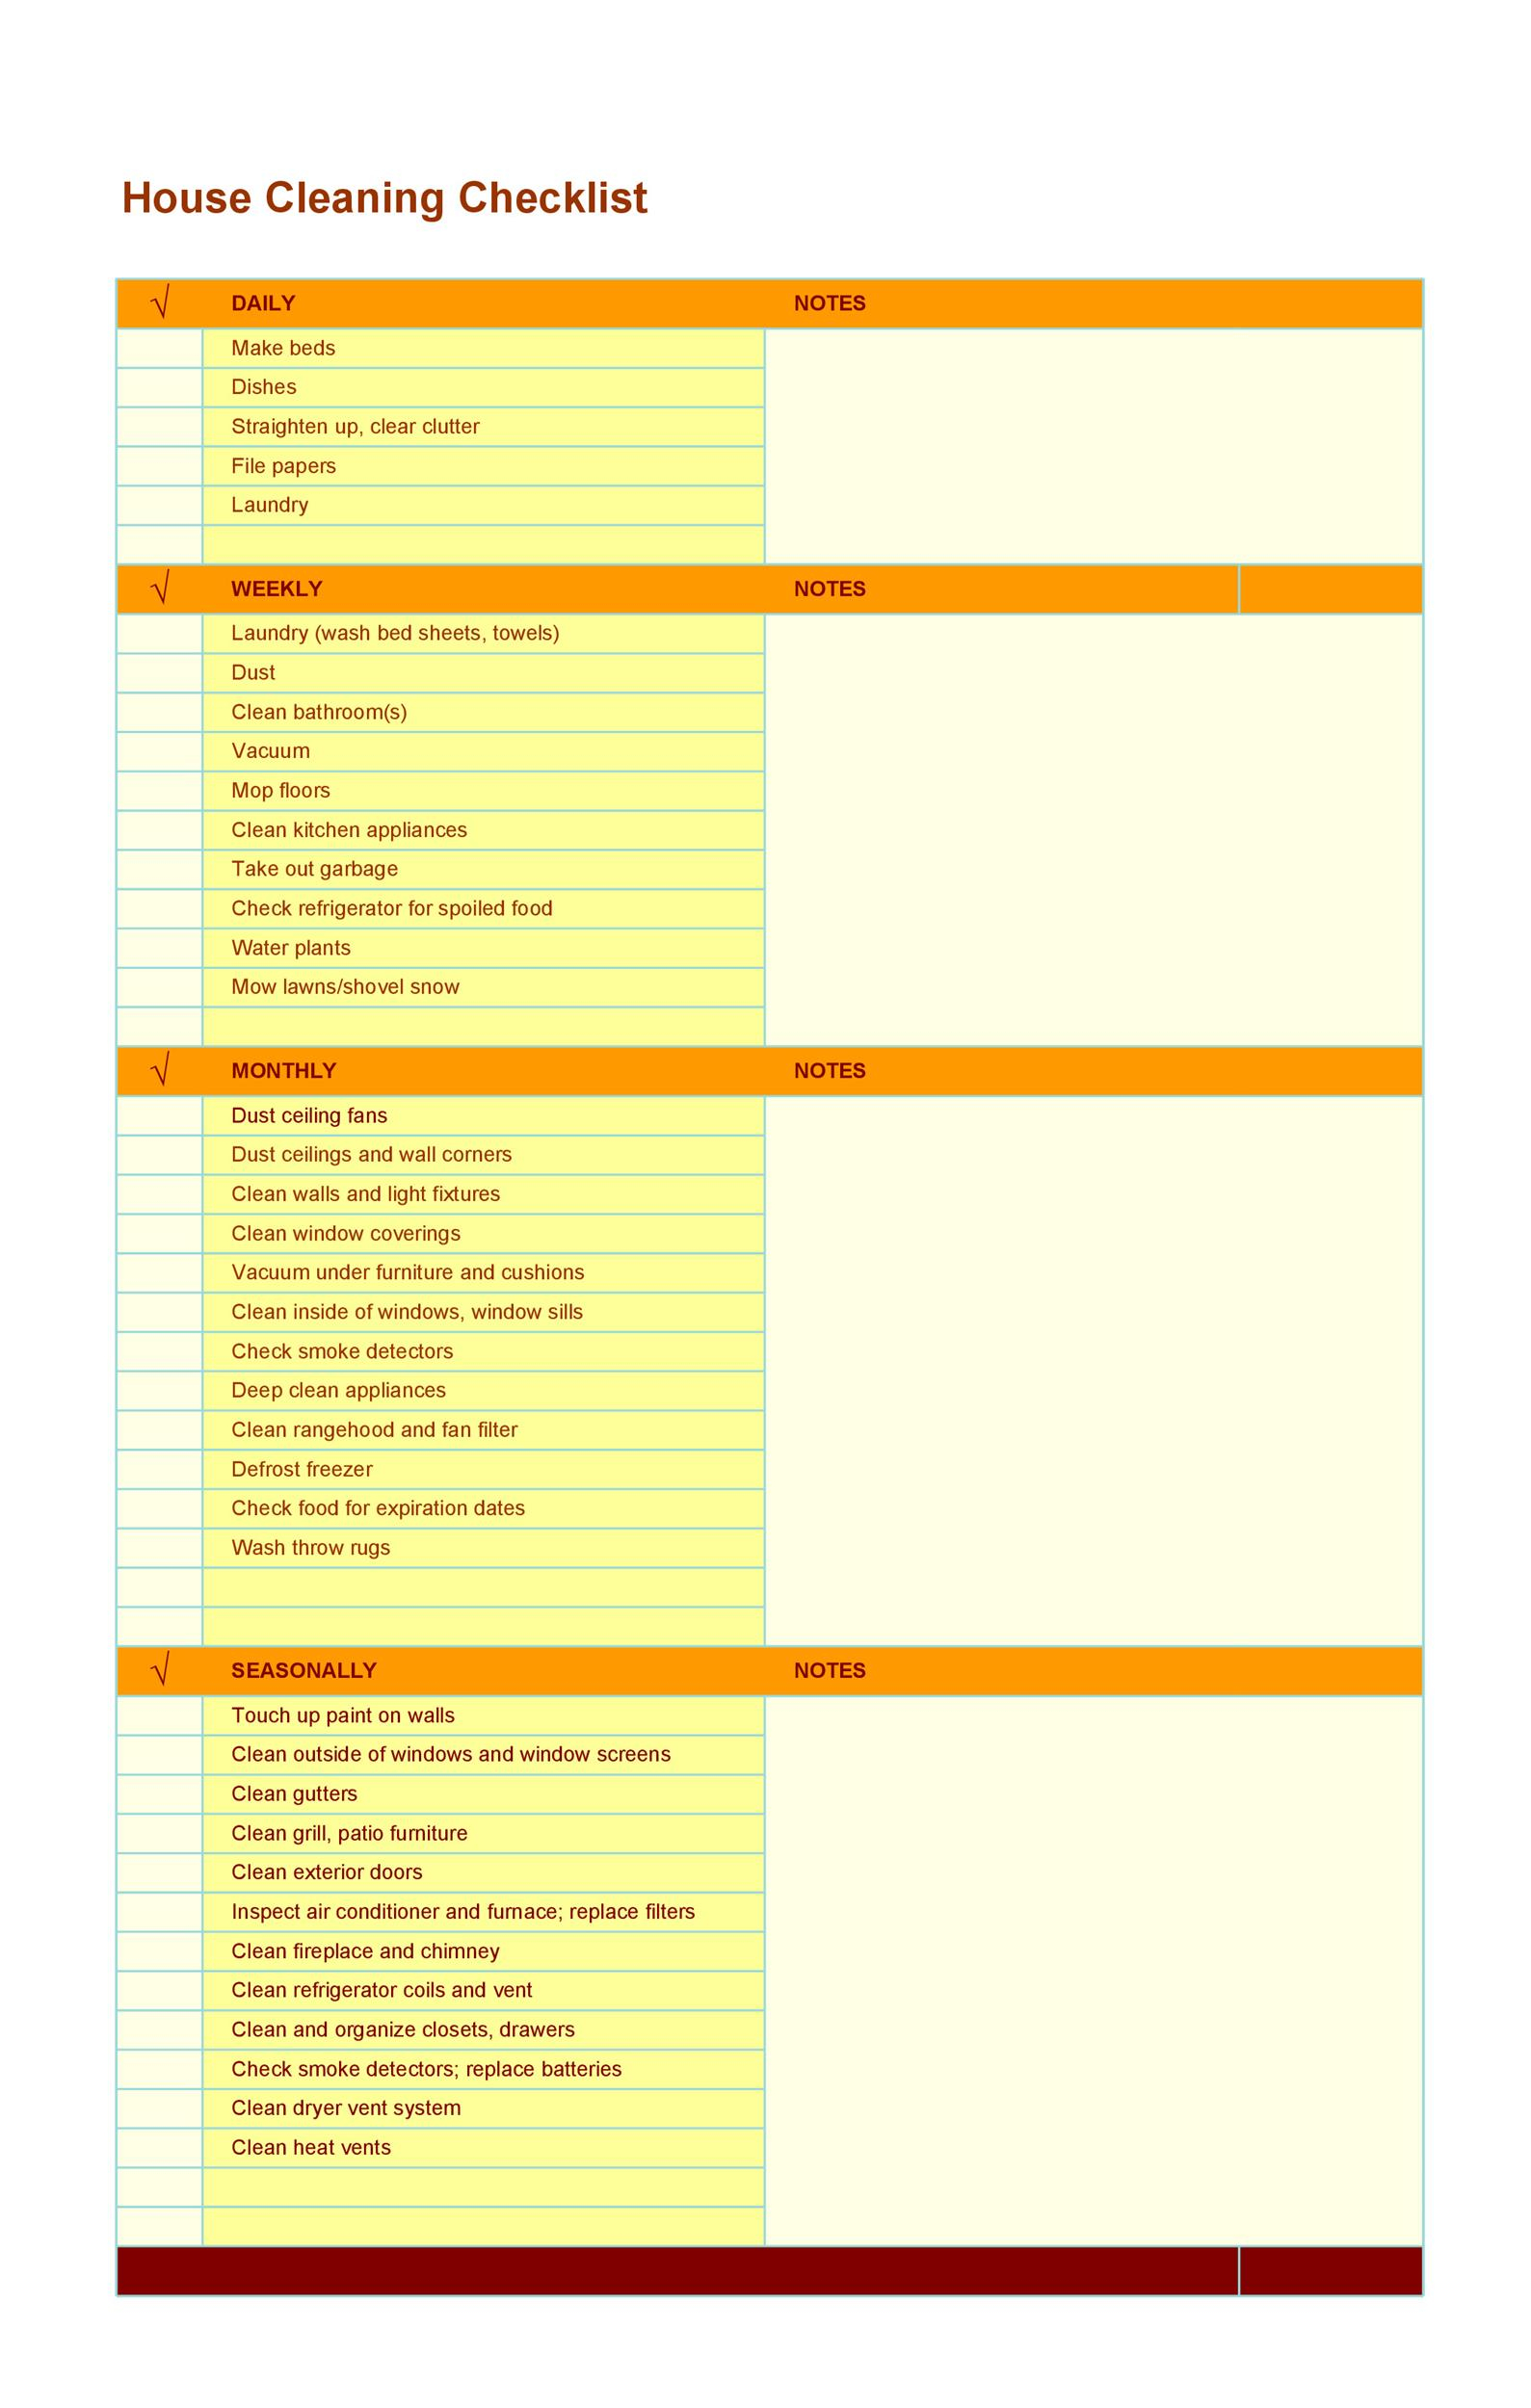 11 Printable House Cleaning Checklist Templates ᐅ TemplateLab Pertaining To Residential Cleaning Checklist Template Pertaining To Residential Cleaning Checklist Template